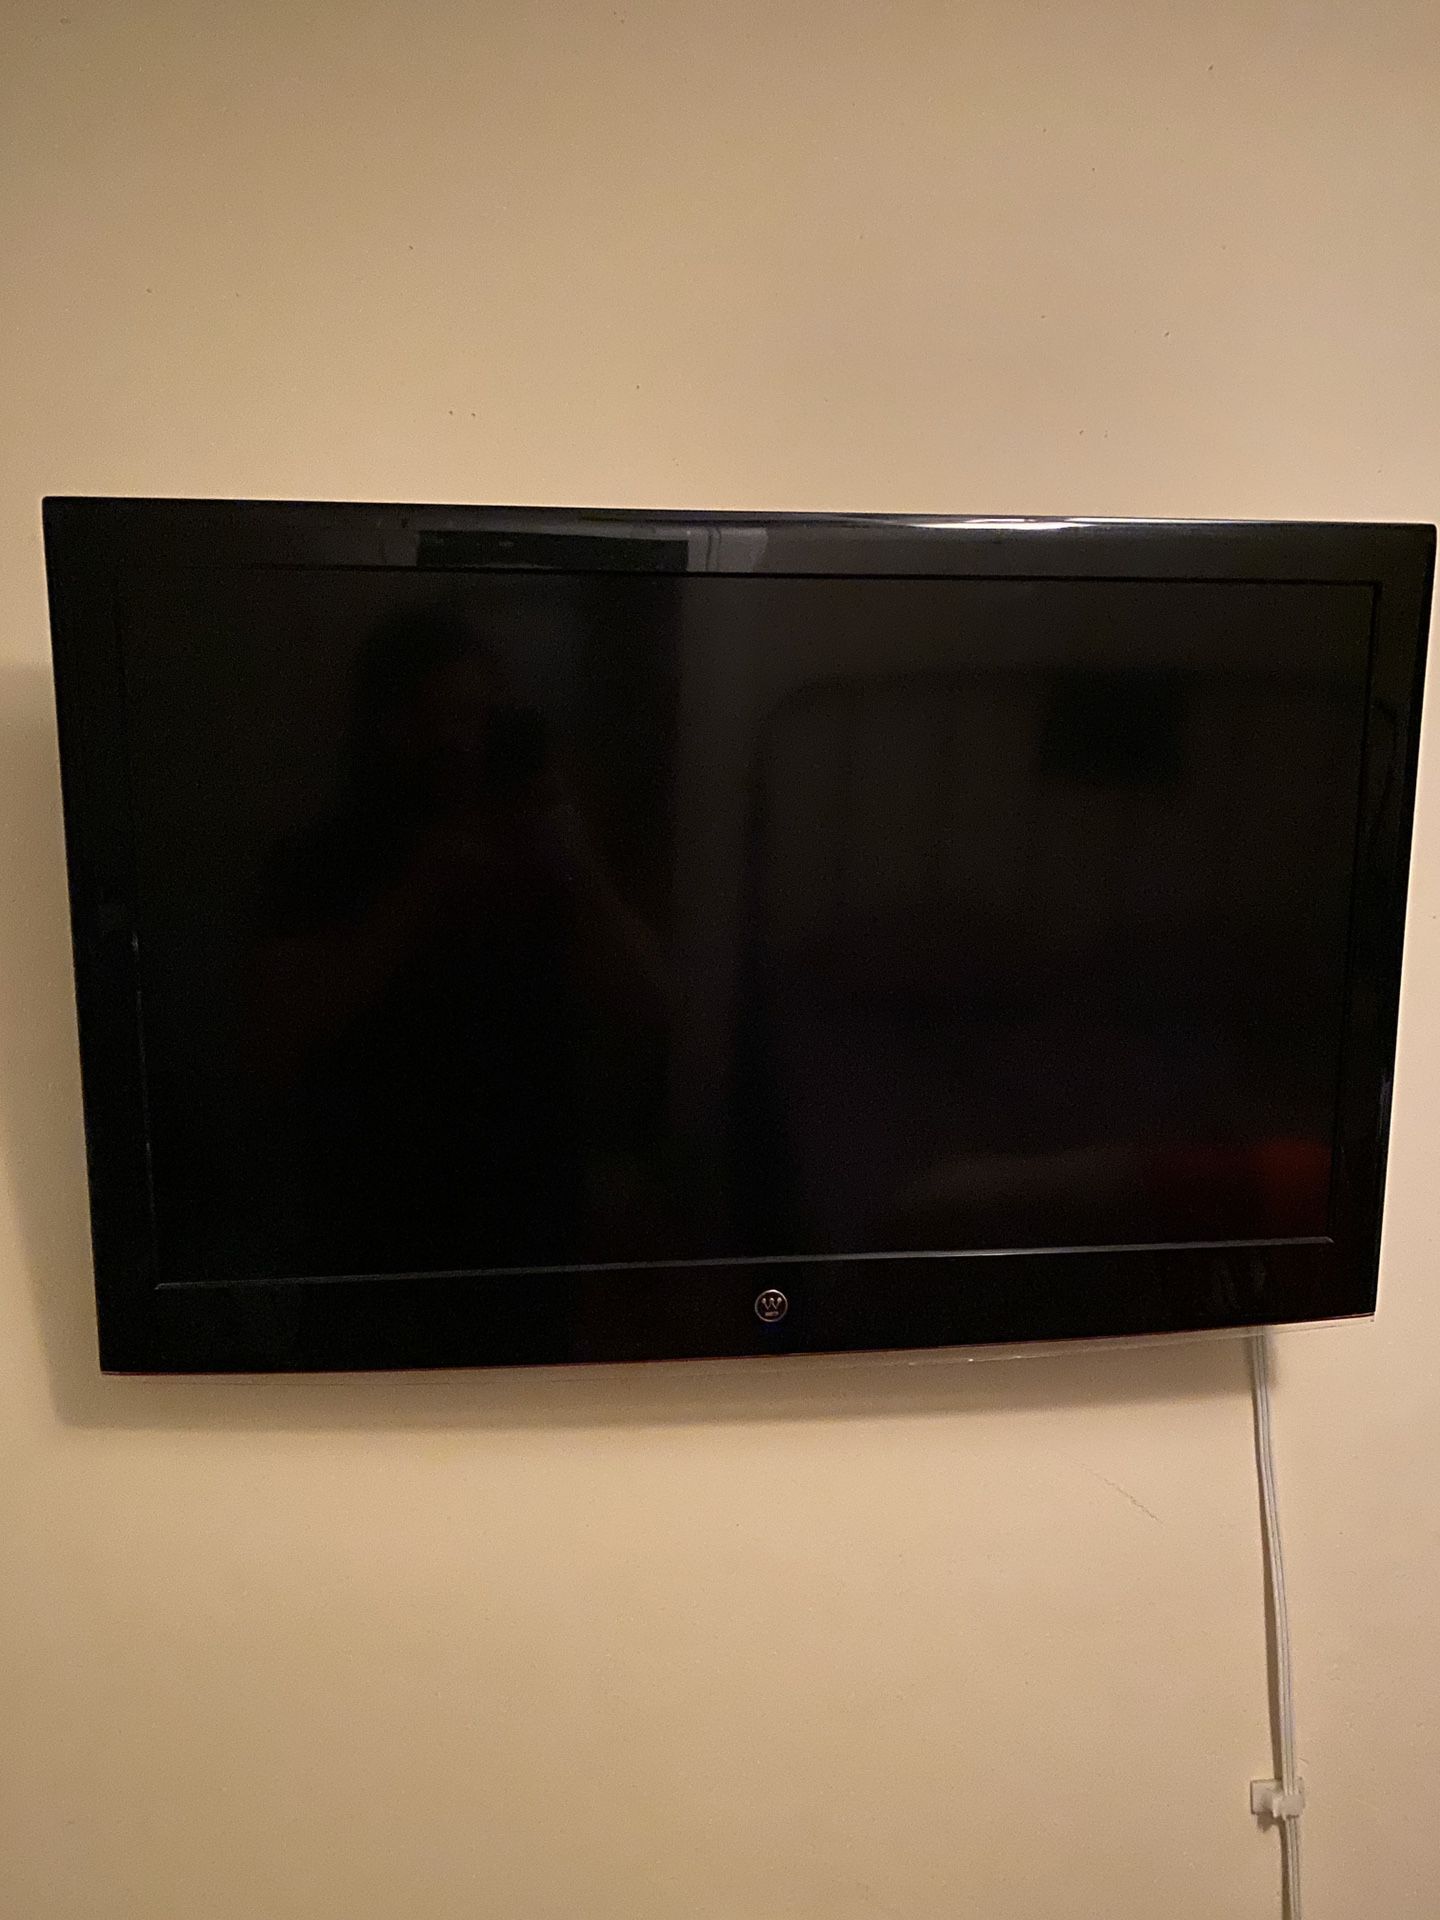 westinghouse TV with wall mount